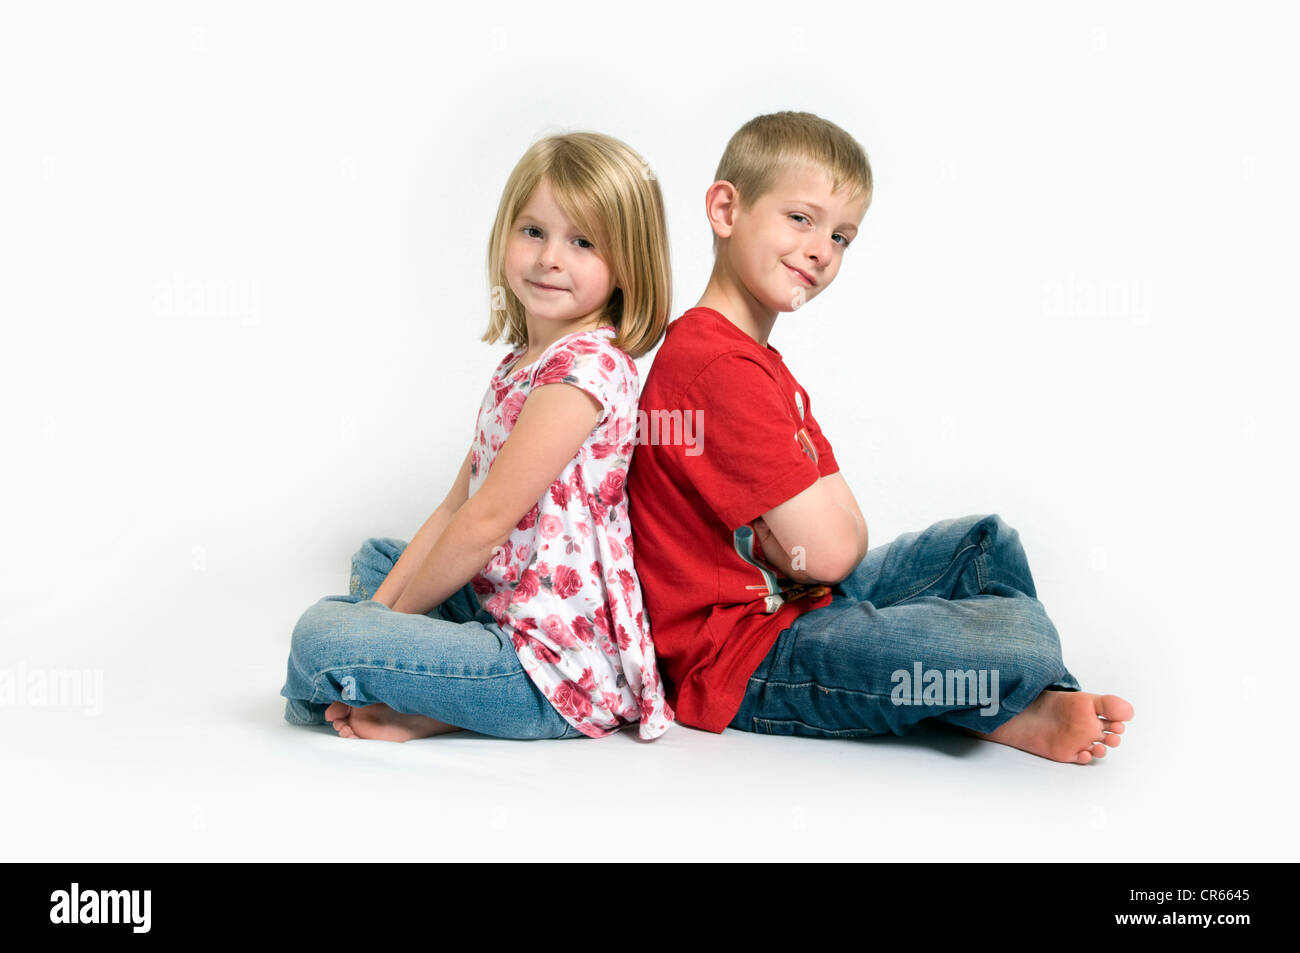 Two Caucasian children, a brother and sister sat back to back smiling (7 year old girl and 8 year old boy) on a white background Stock Photo